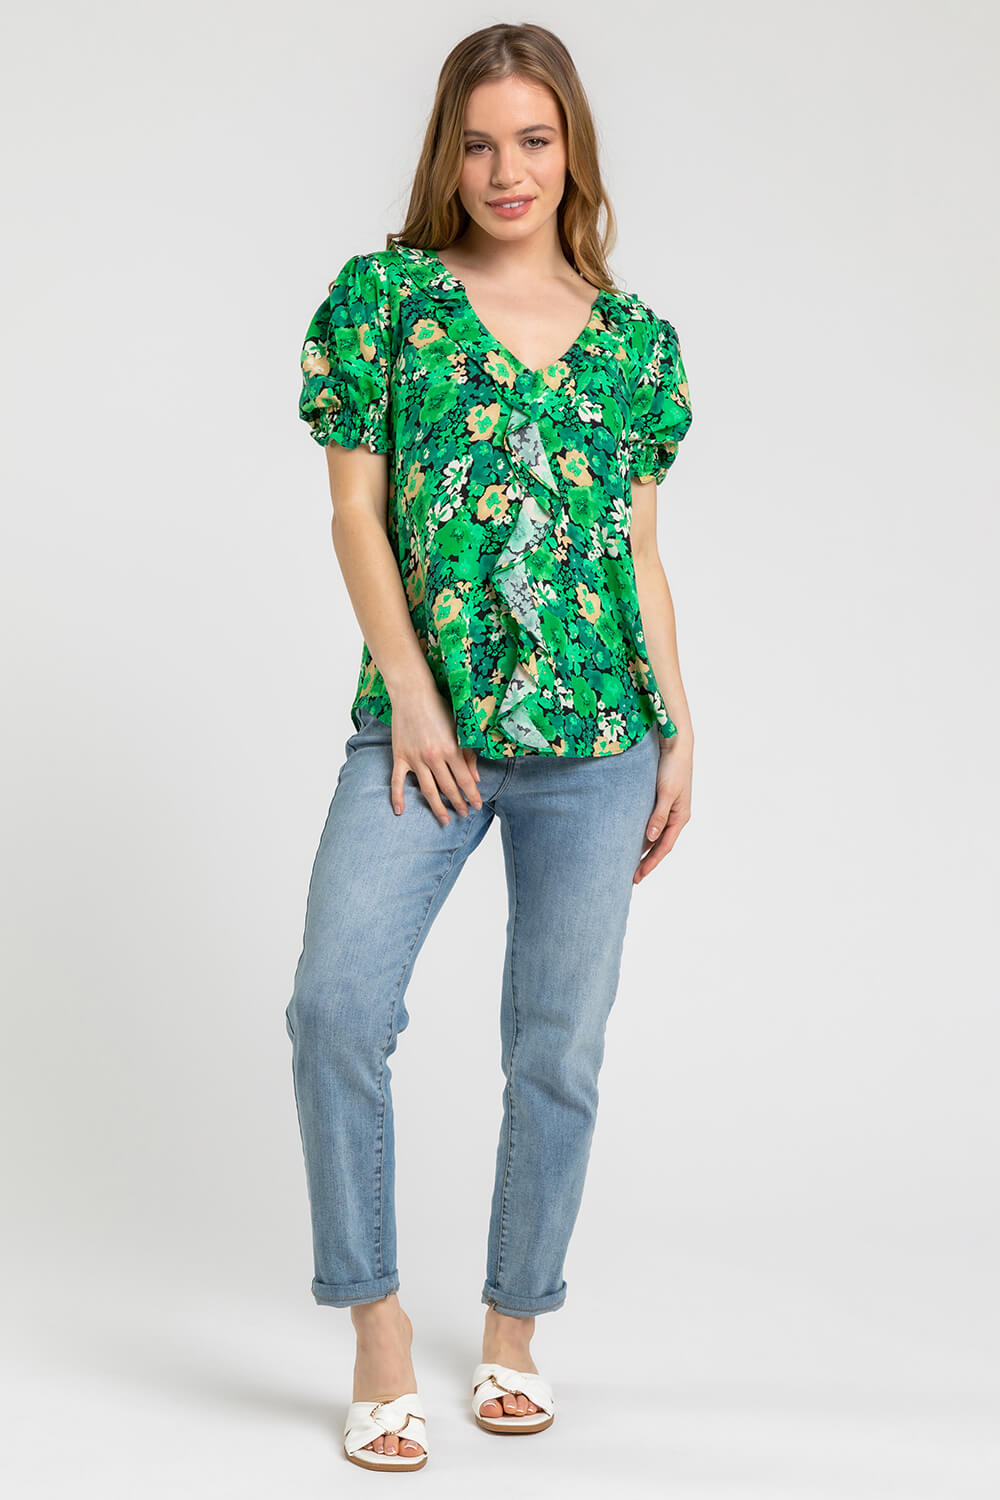 Green Petite Floral Print Frill Detail Top, Image 3 of 4